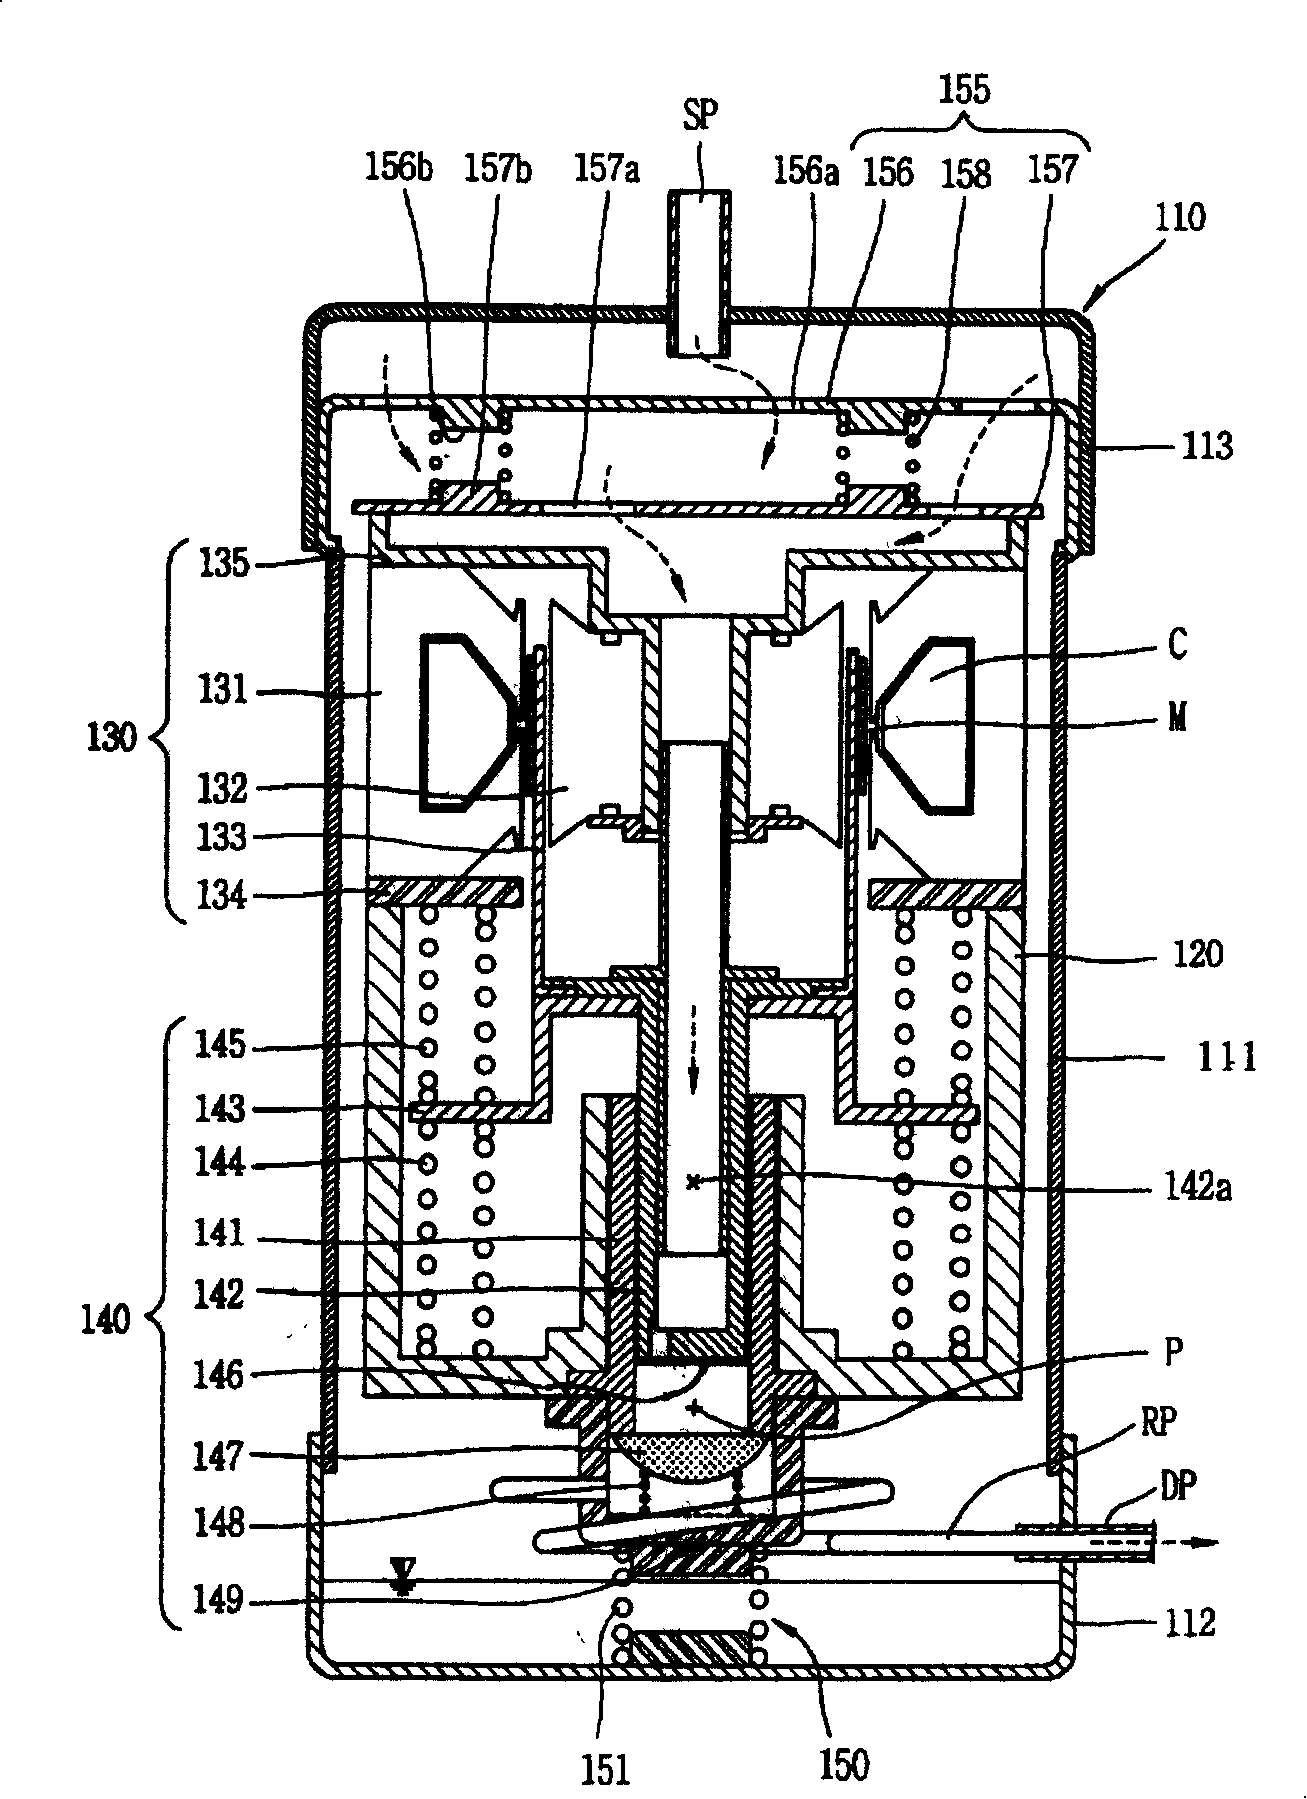 Supporting apparatus for reciprocating compressor